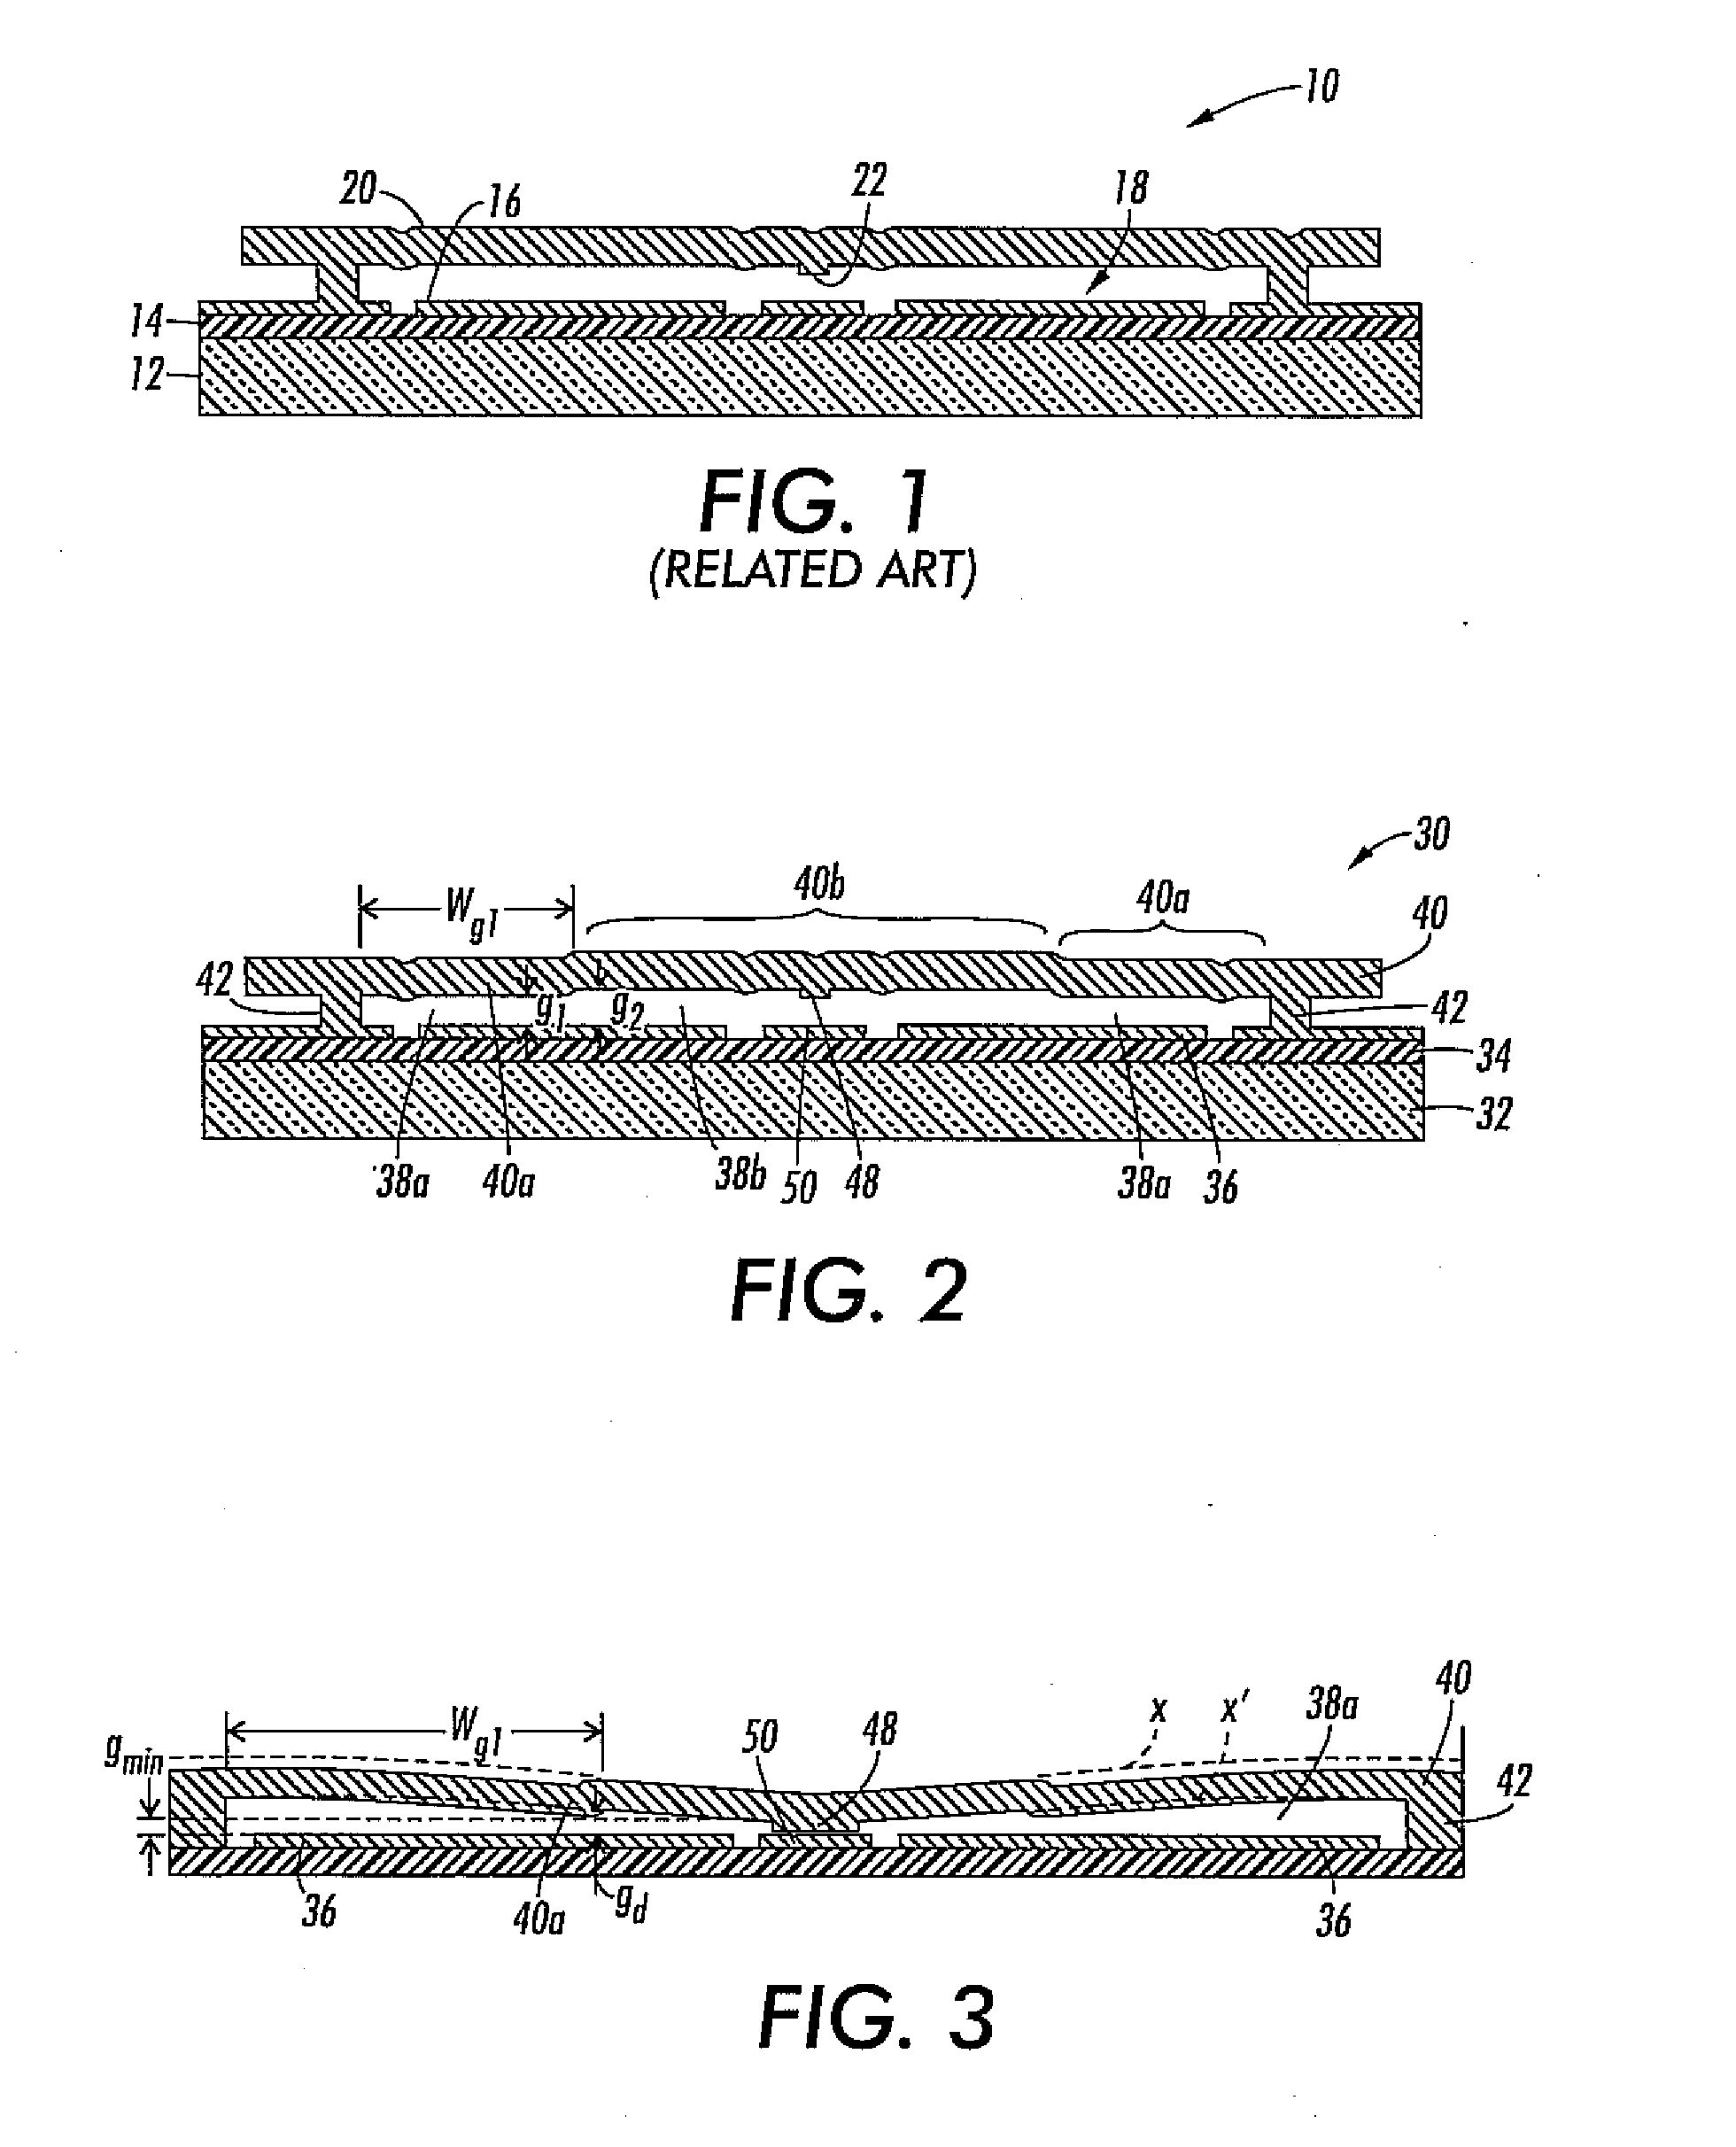 Electrostatic actuator device and method of making the device